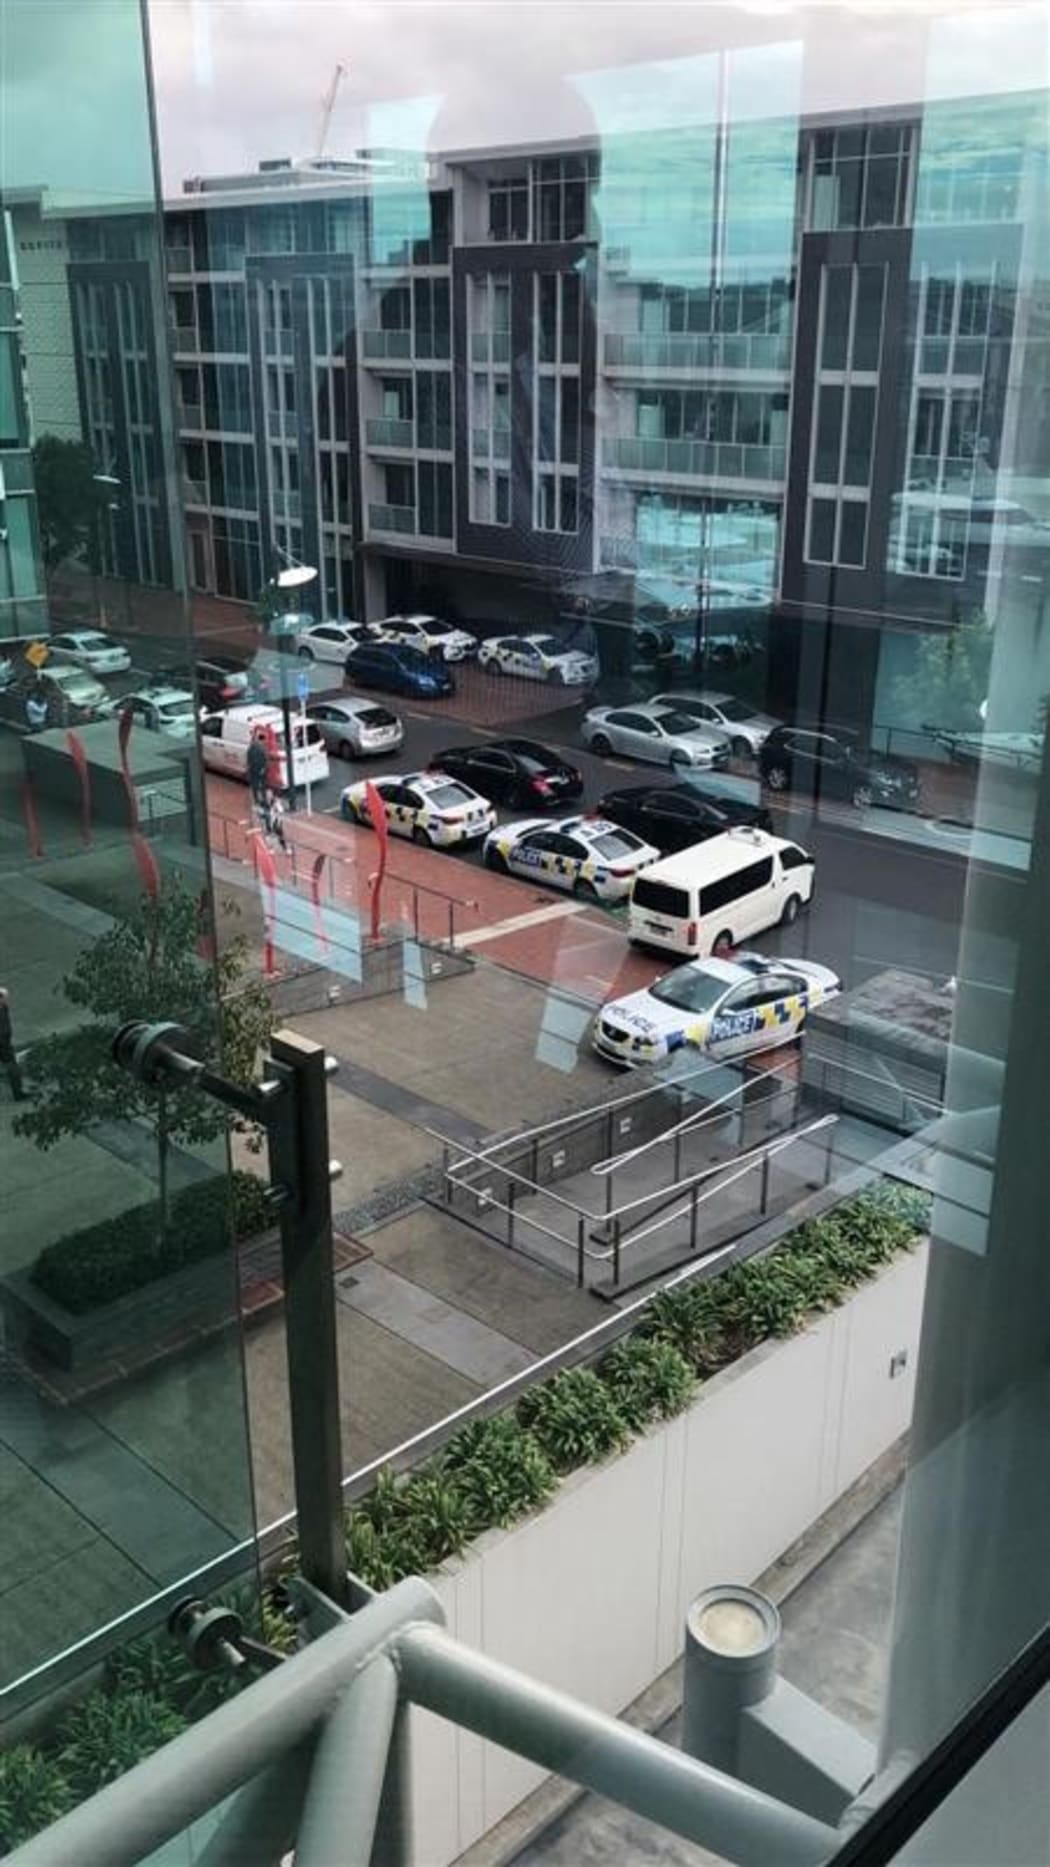 Police cars at the Sofitel in Auckland's Viaduct Harbour.